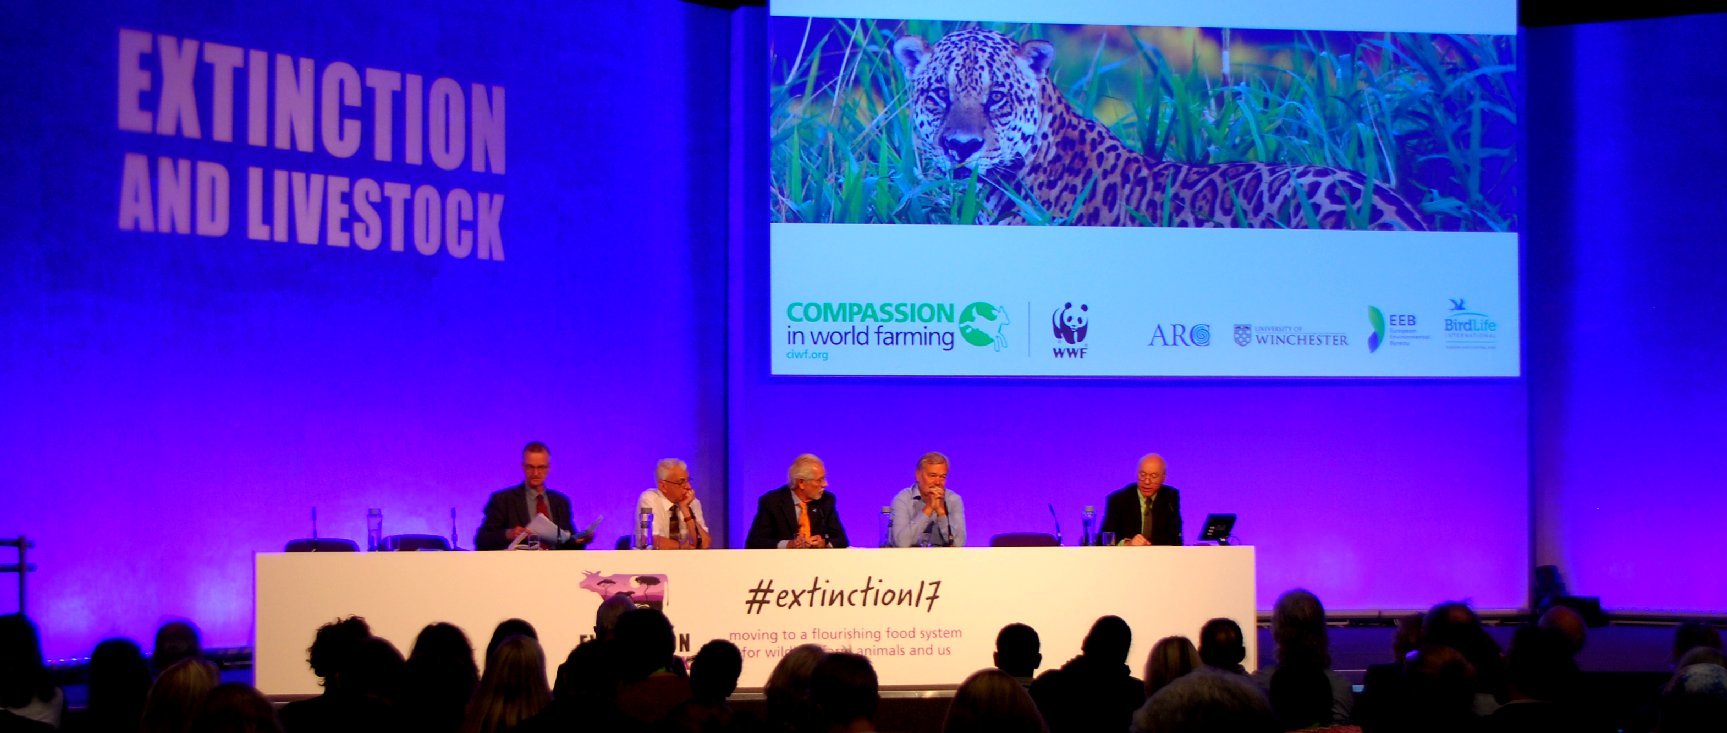 Extinction in livestock conference, London 2017